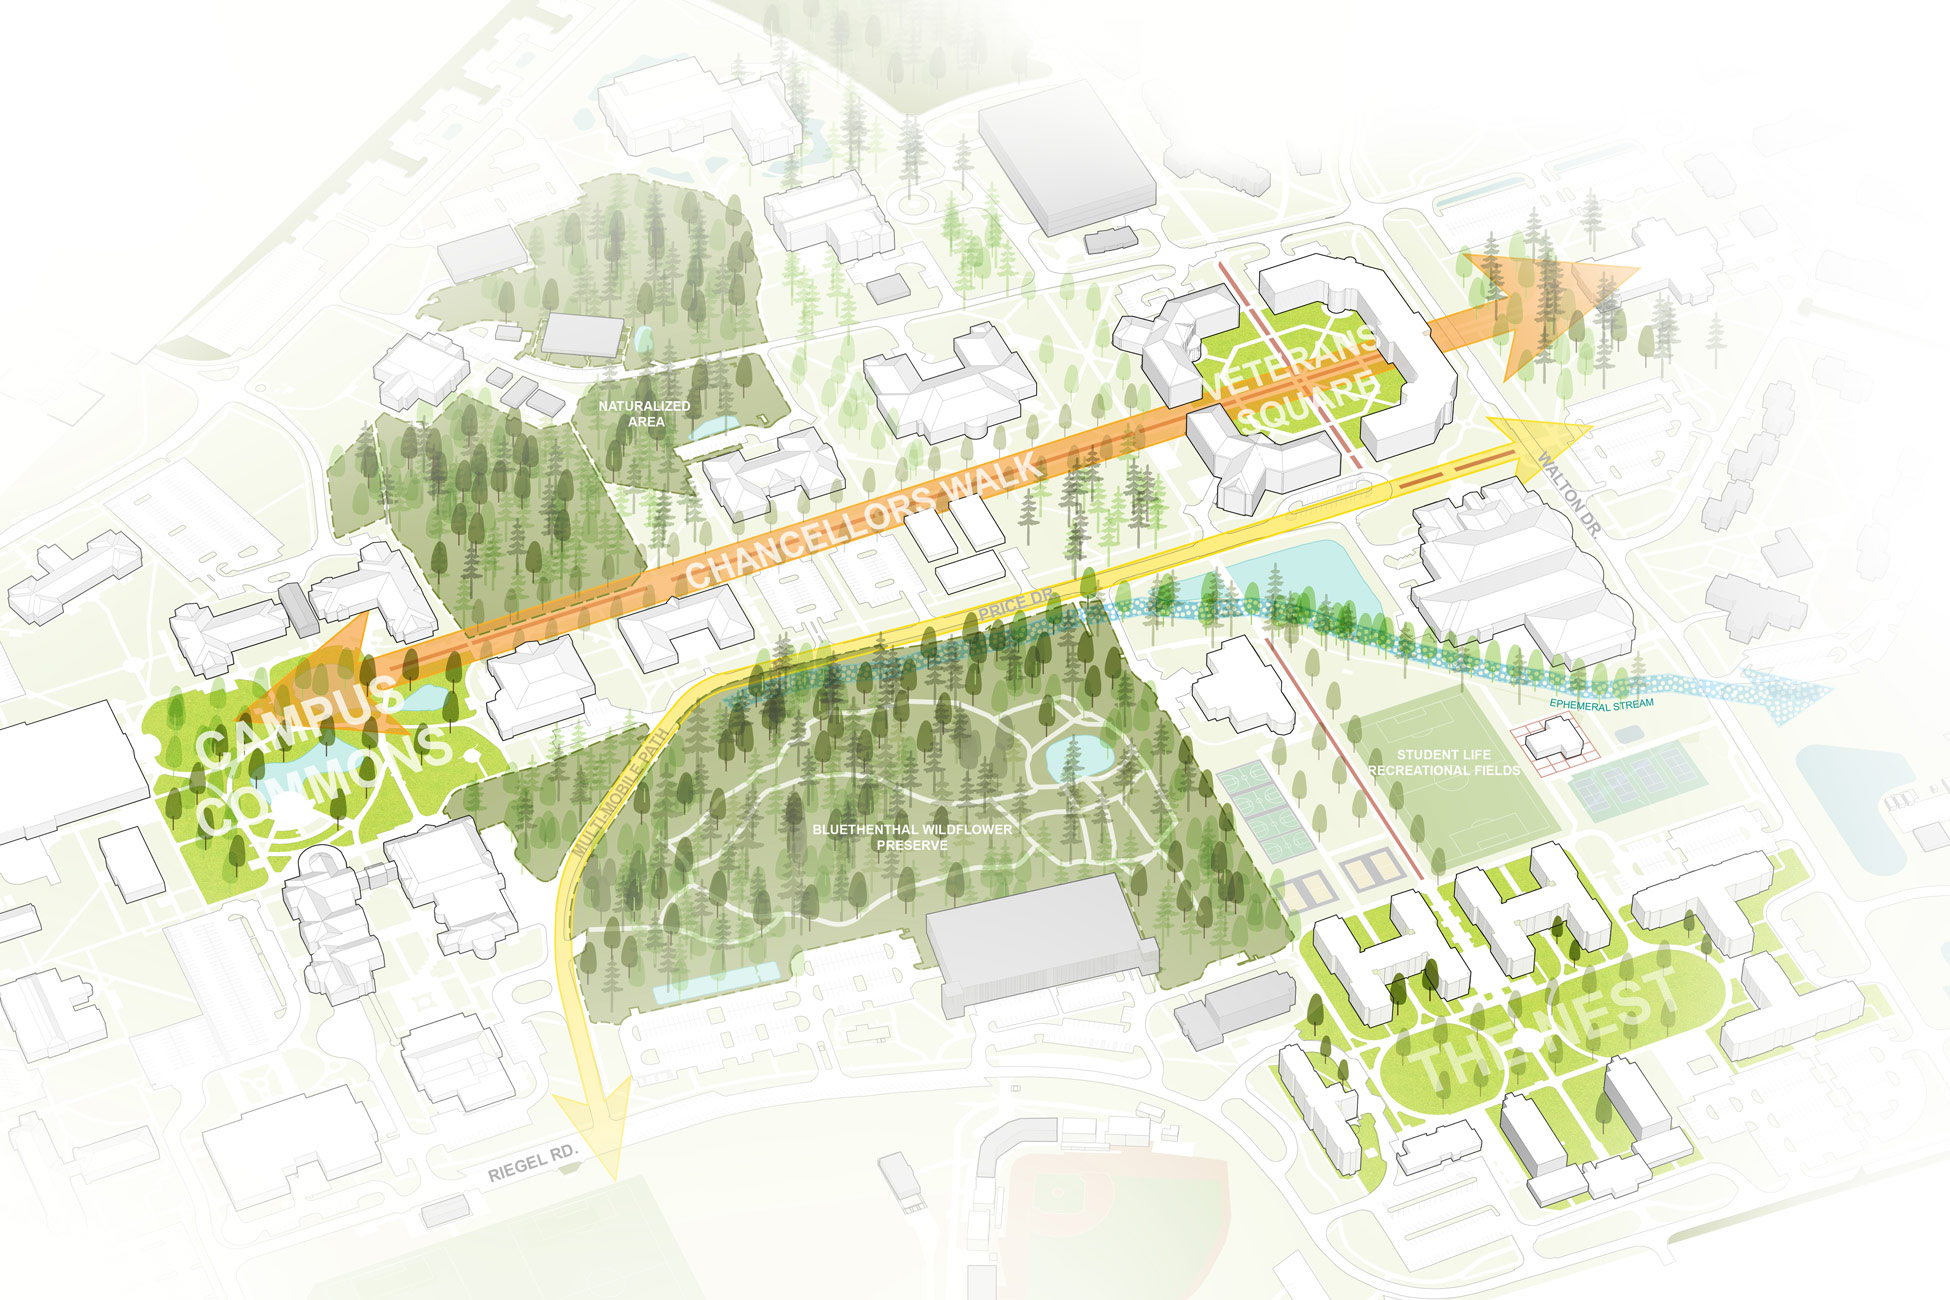 A 3-D rendering of the campus master plan